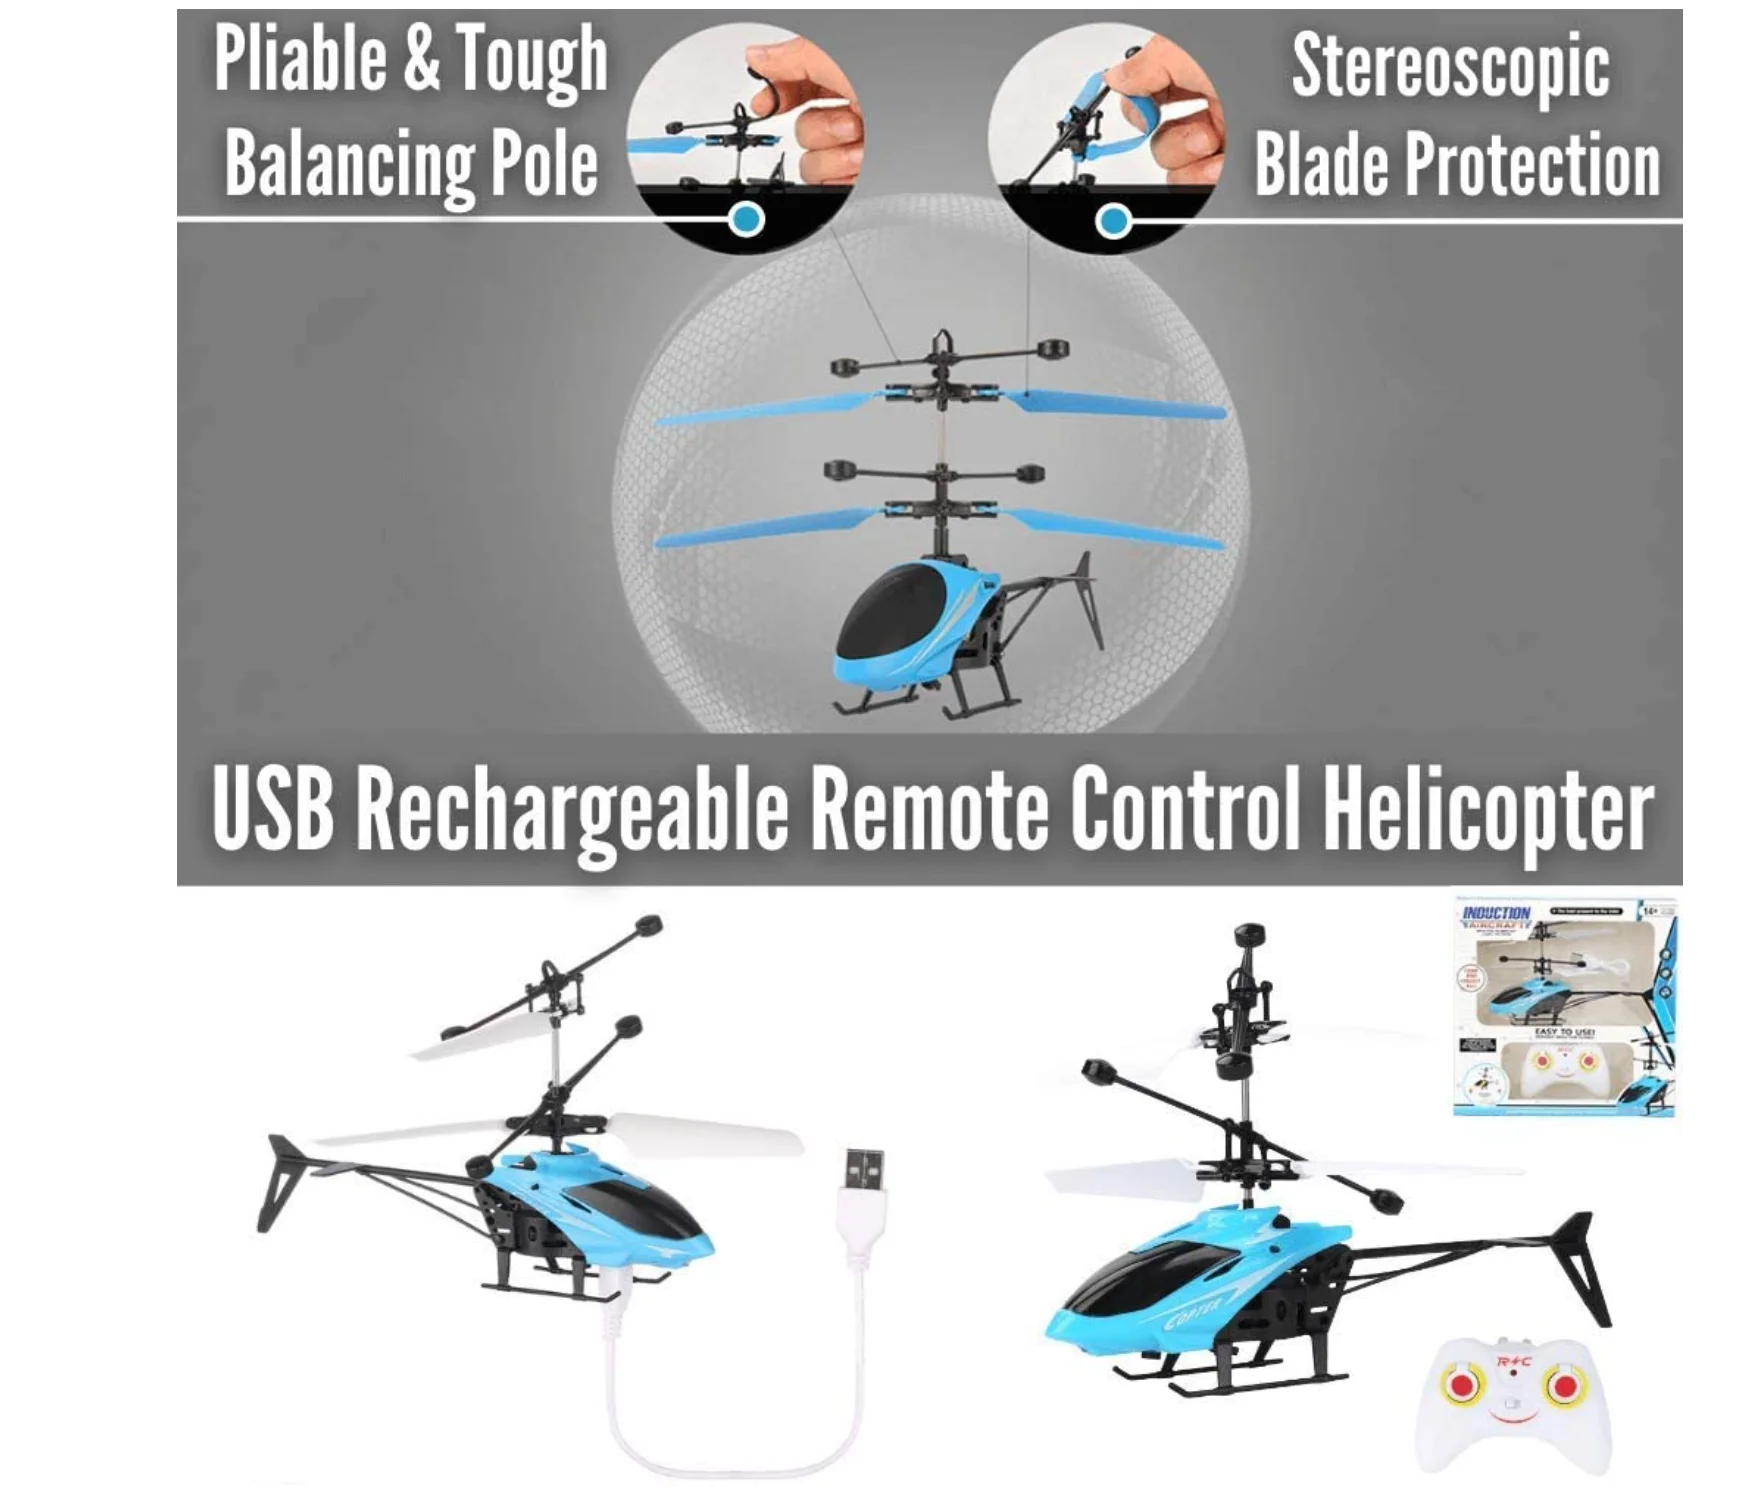 XY-502 Children Remote Control RC Flying Helicopter Fun Toy For Kids US SHIPPING 